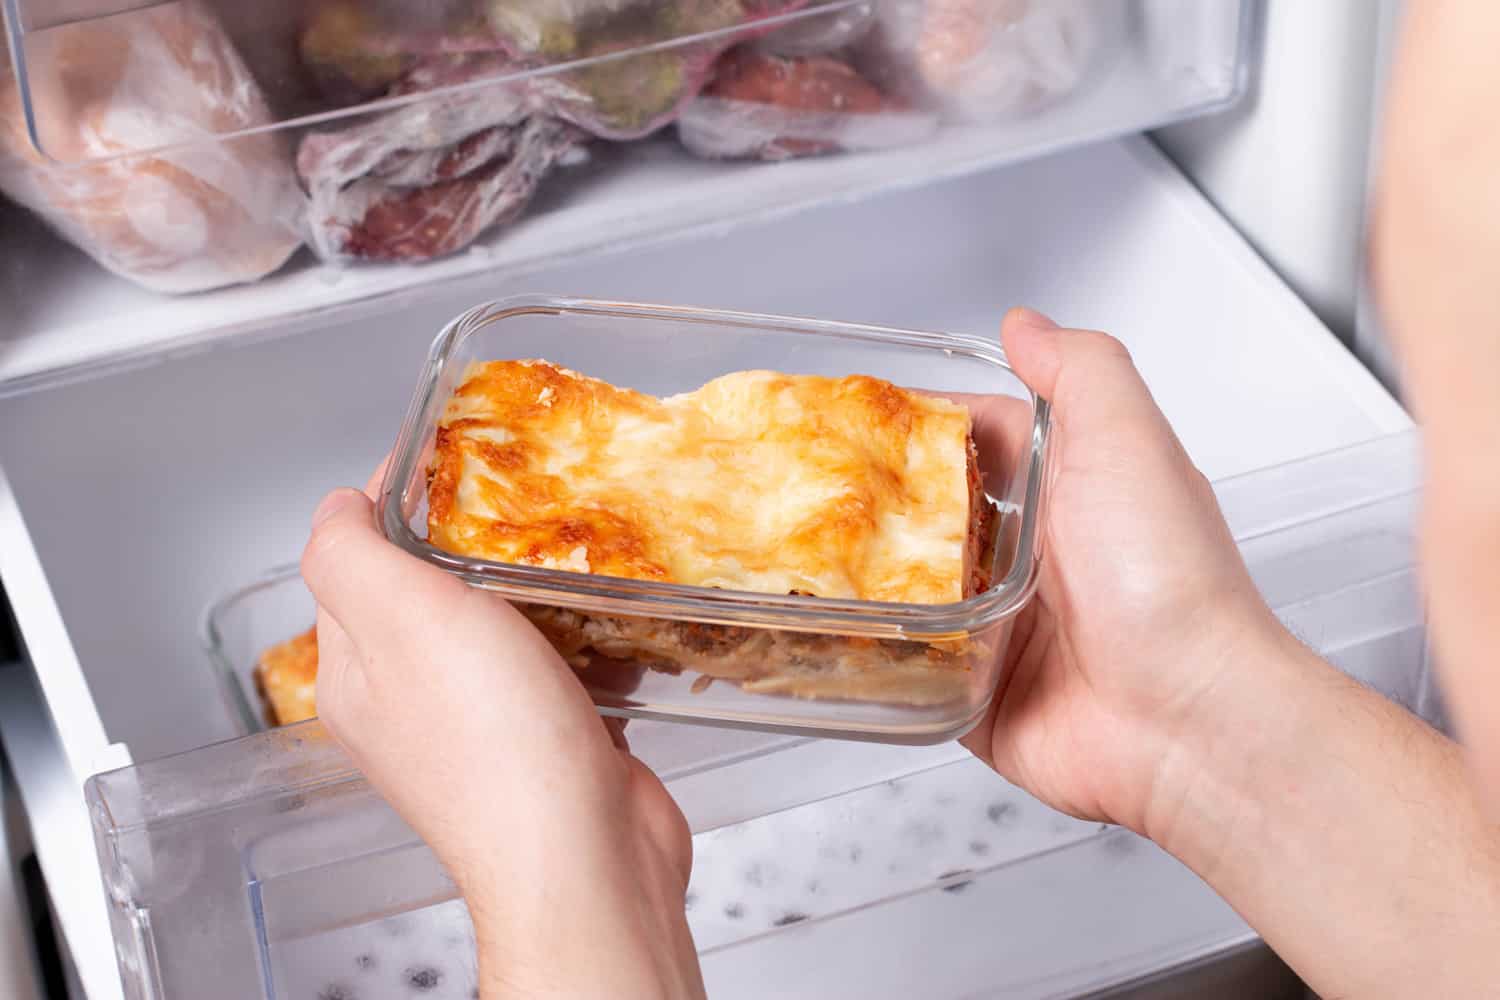 A person is taking a container of frozen casserole or lasagne out of the freezer